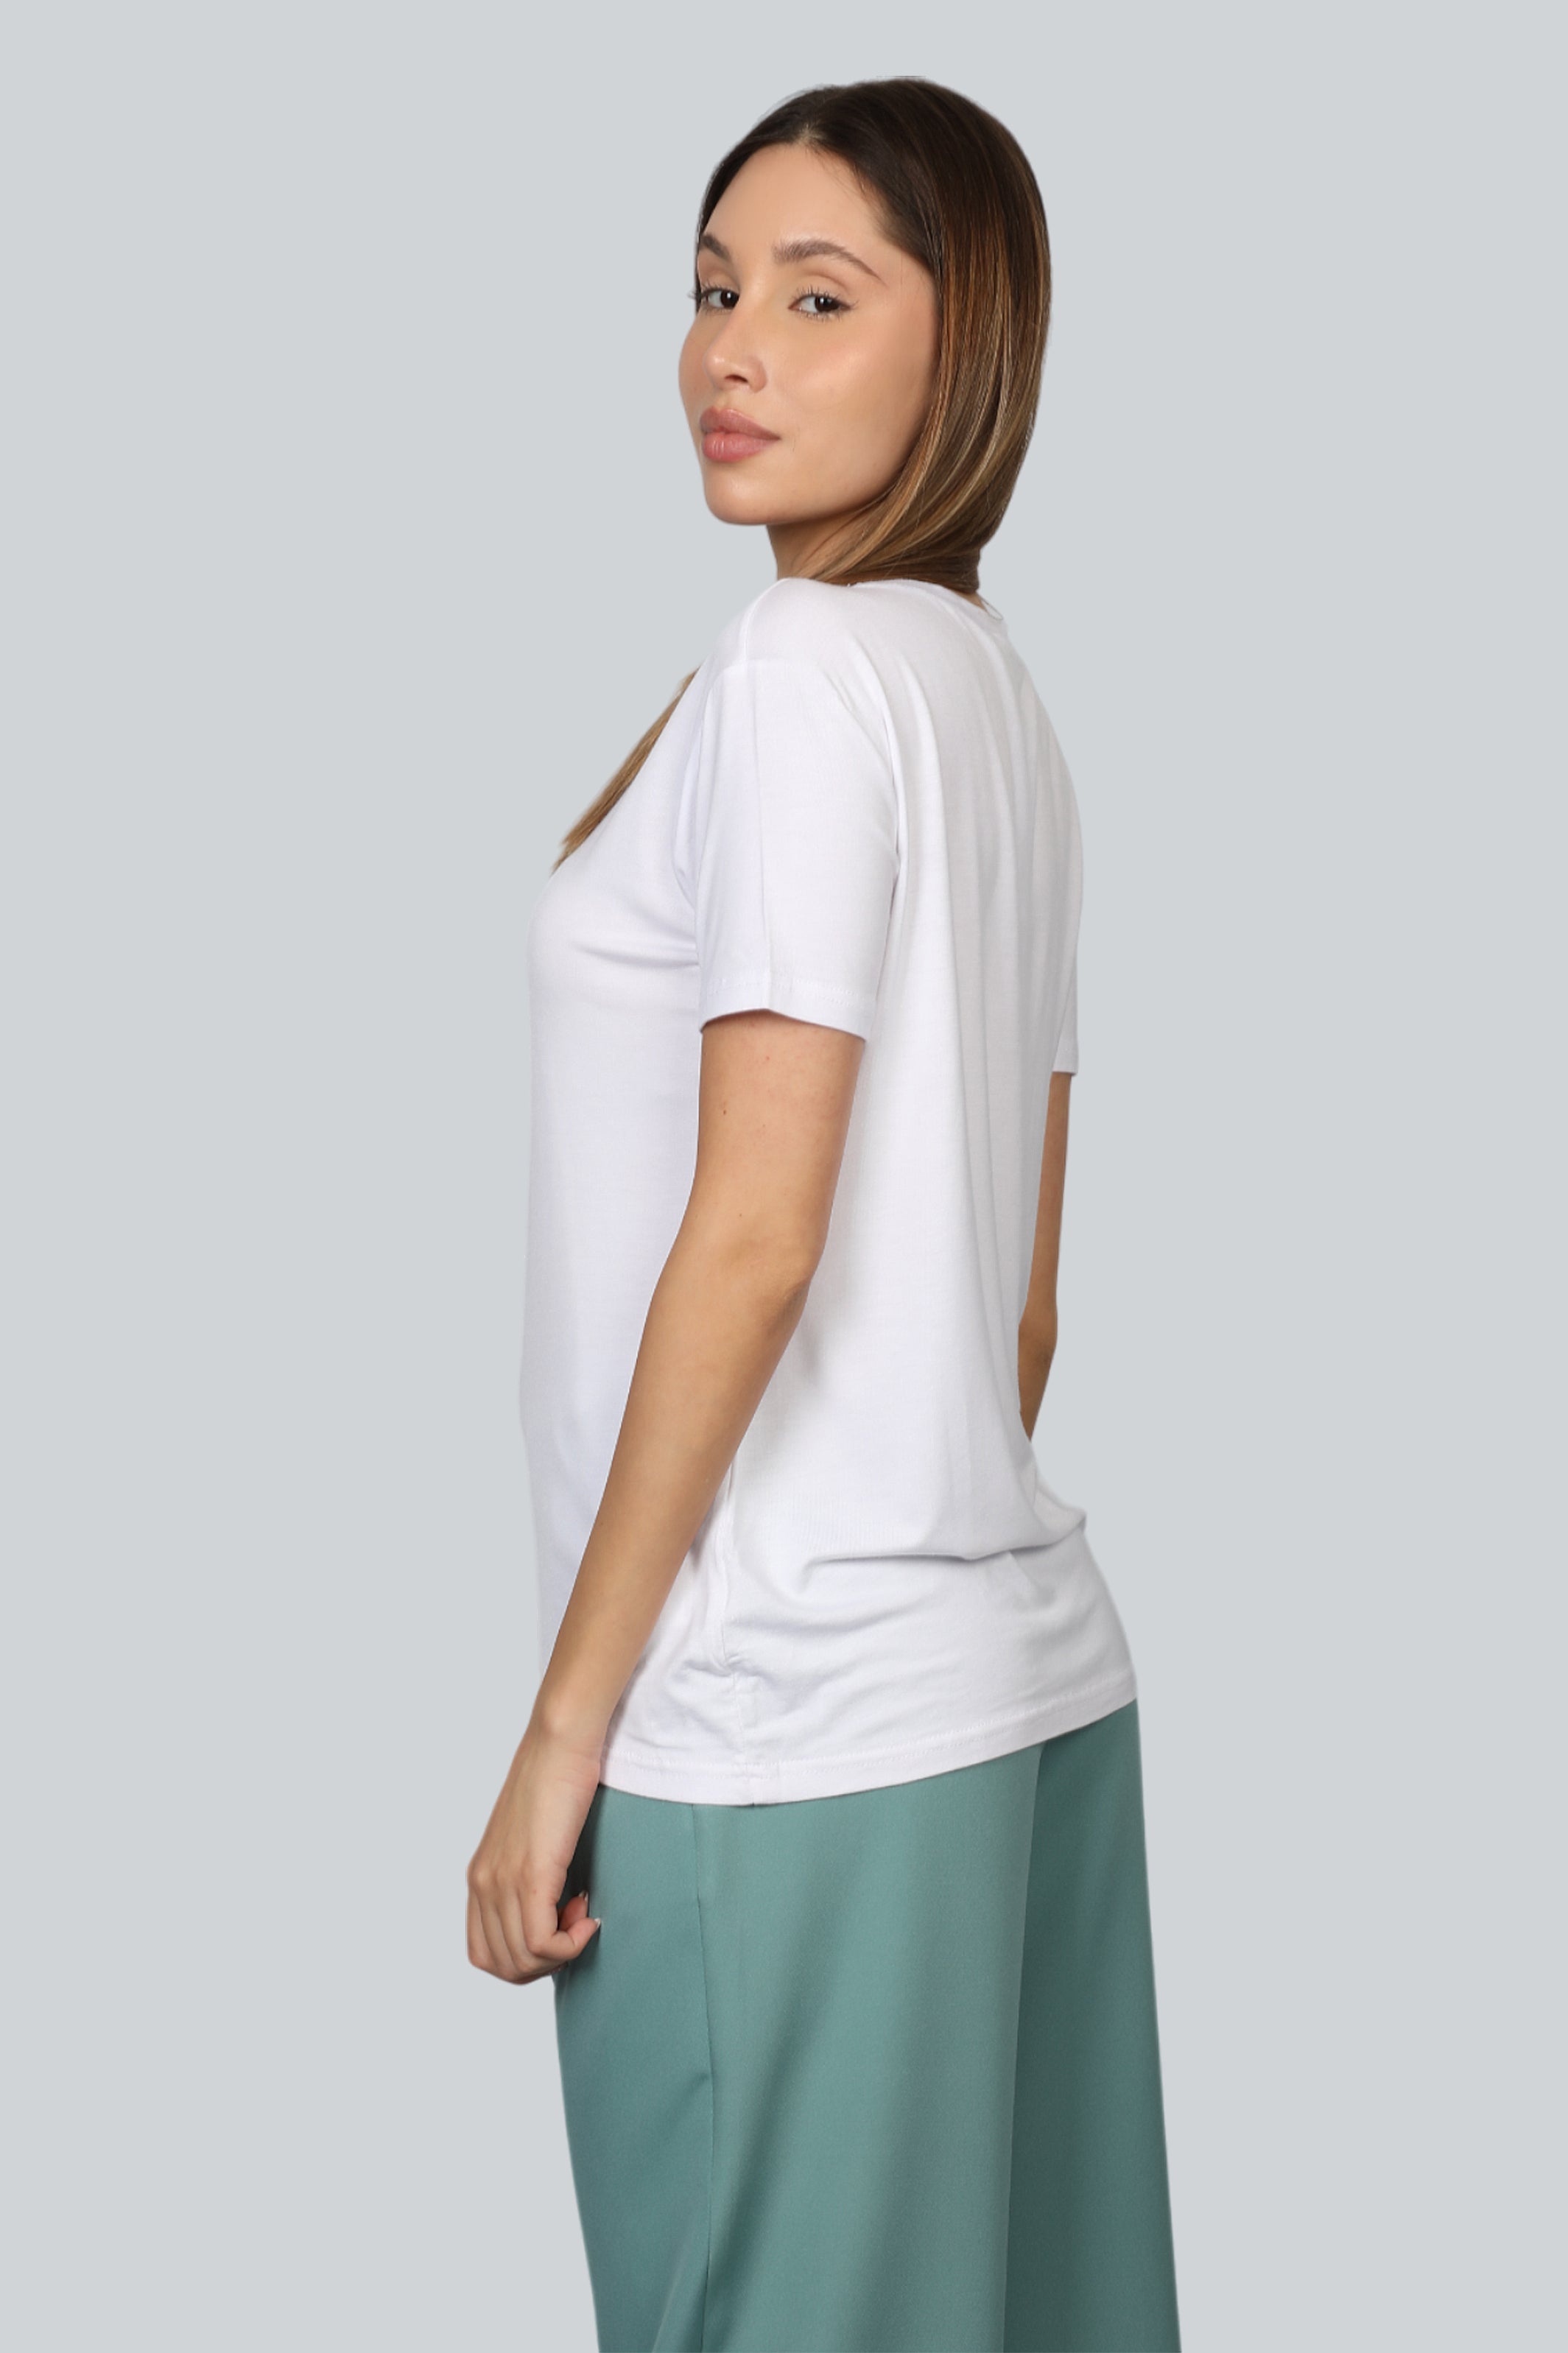 Women Short Sleeves White Top With Neck Design